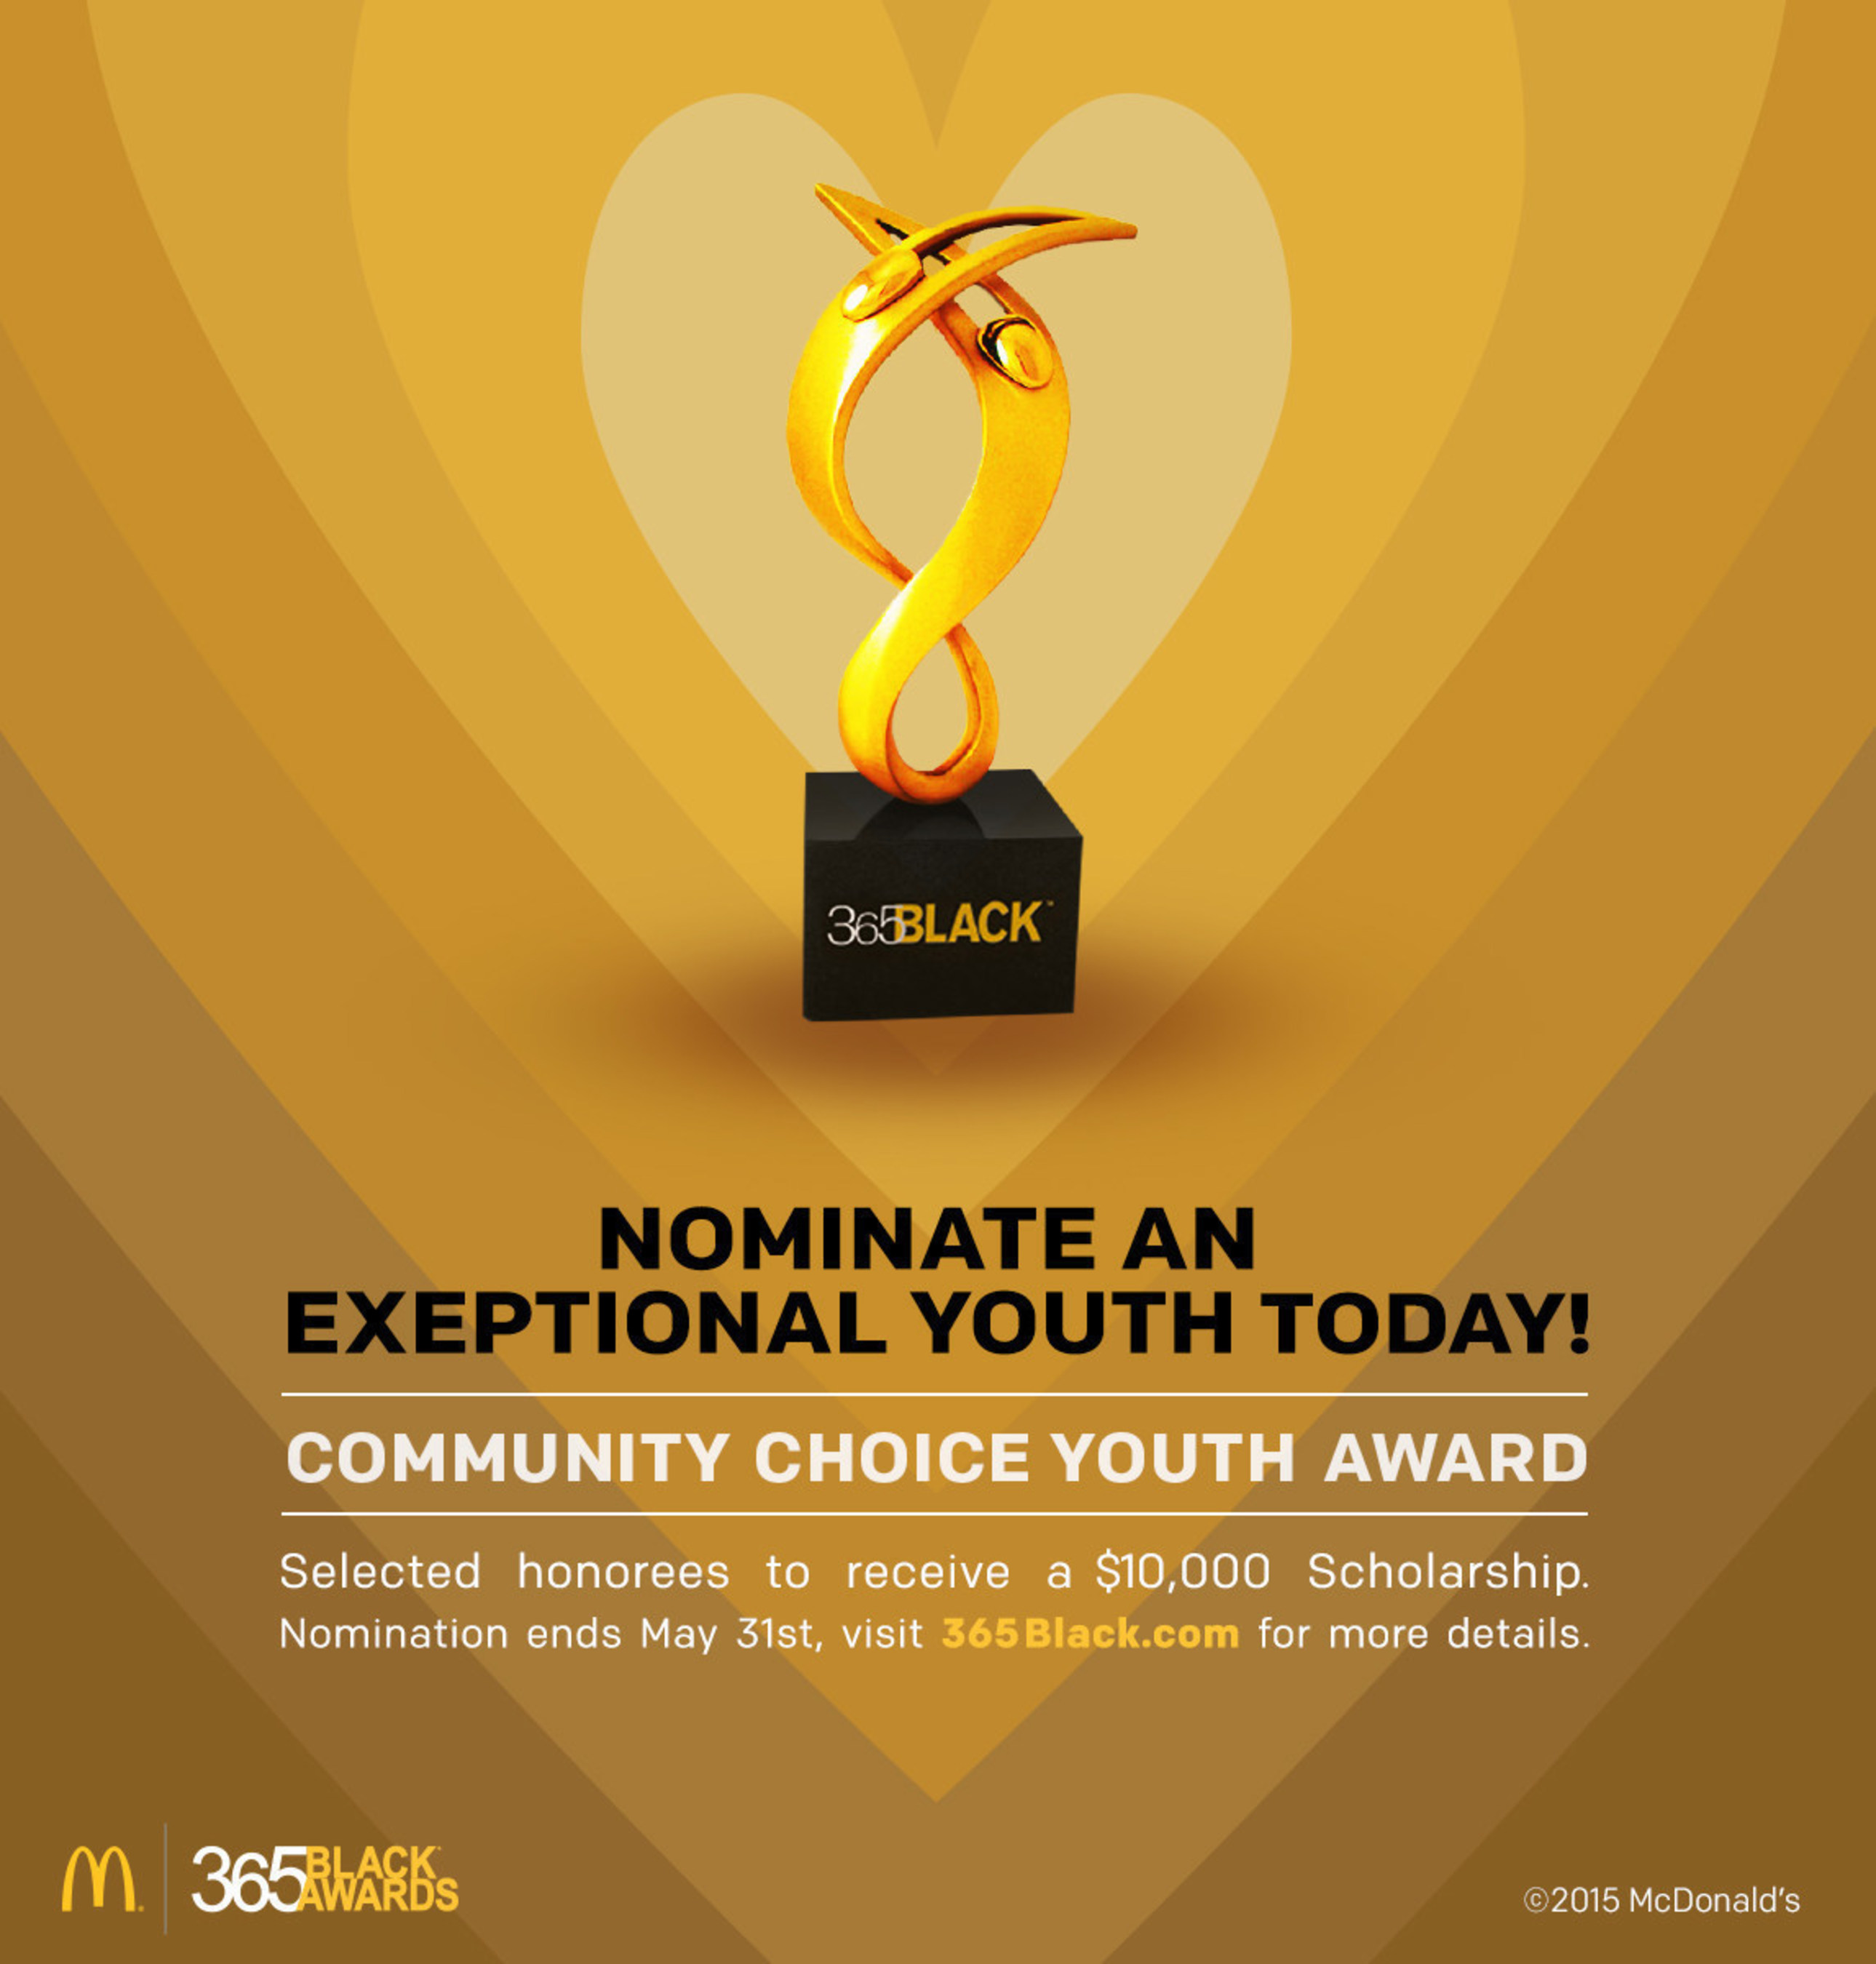 McDonald's USA calls on communities nationwide to nominate this year's 365Black Community Choice Youth Award recipients. Now through May 31, consumers can visit www.365Black.com to nominate a teen who has exemplified exceptional leadership in their communities. One male and one female recipient will each receive a $10,000 scholarship and will be honored alongside celebrities, philanthropists and influencers at the 12th annual McDonald's 365Black Awards in New Orleans.